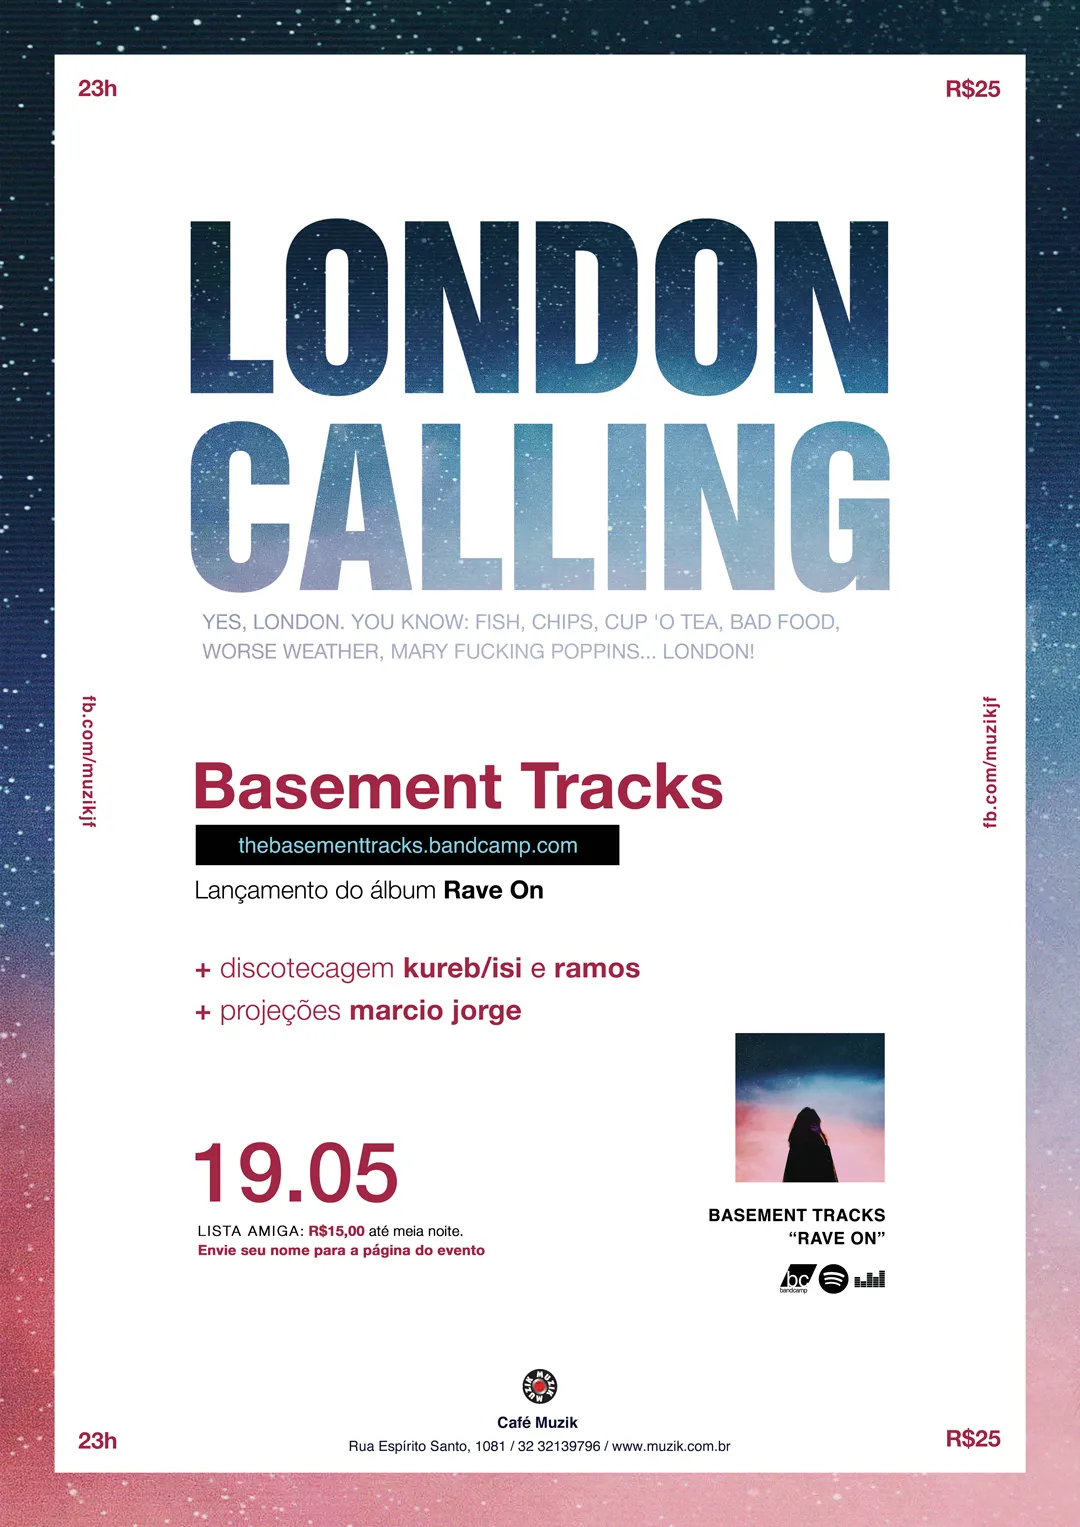 London Calling,Yes, London. You know: fish, chips, cup 'o tea, bad food, worse weather, Mary fucking Poppins... LONDON! Basement Tracks, lançamento do disco Rave On. Capa do disco. 19.05